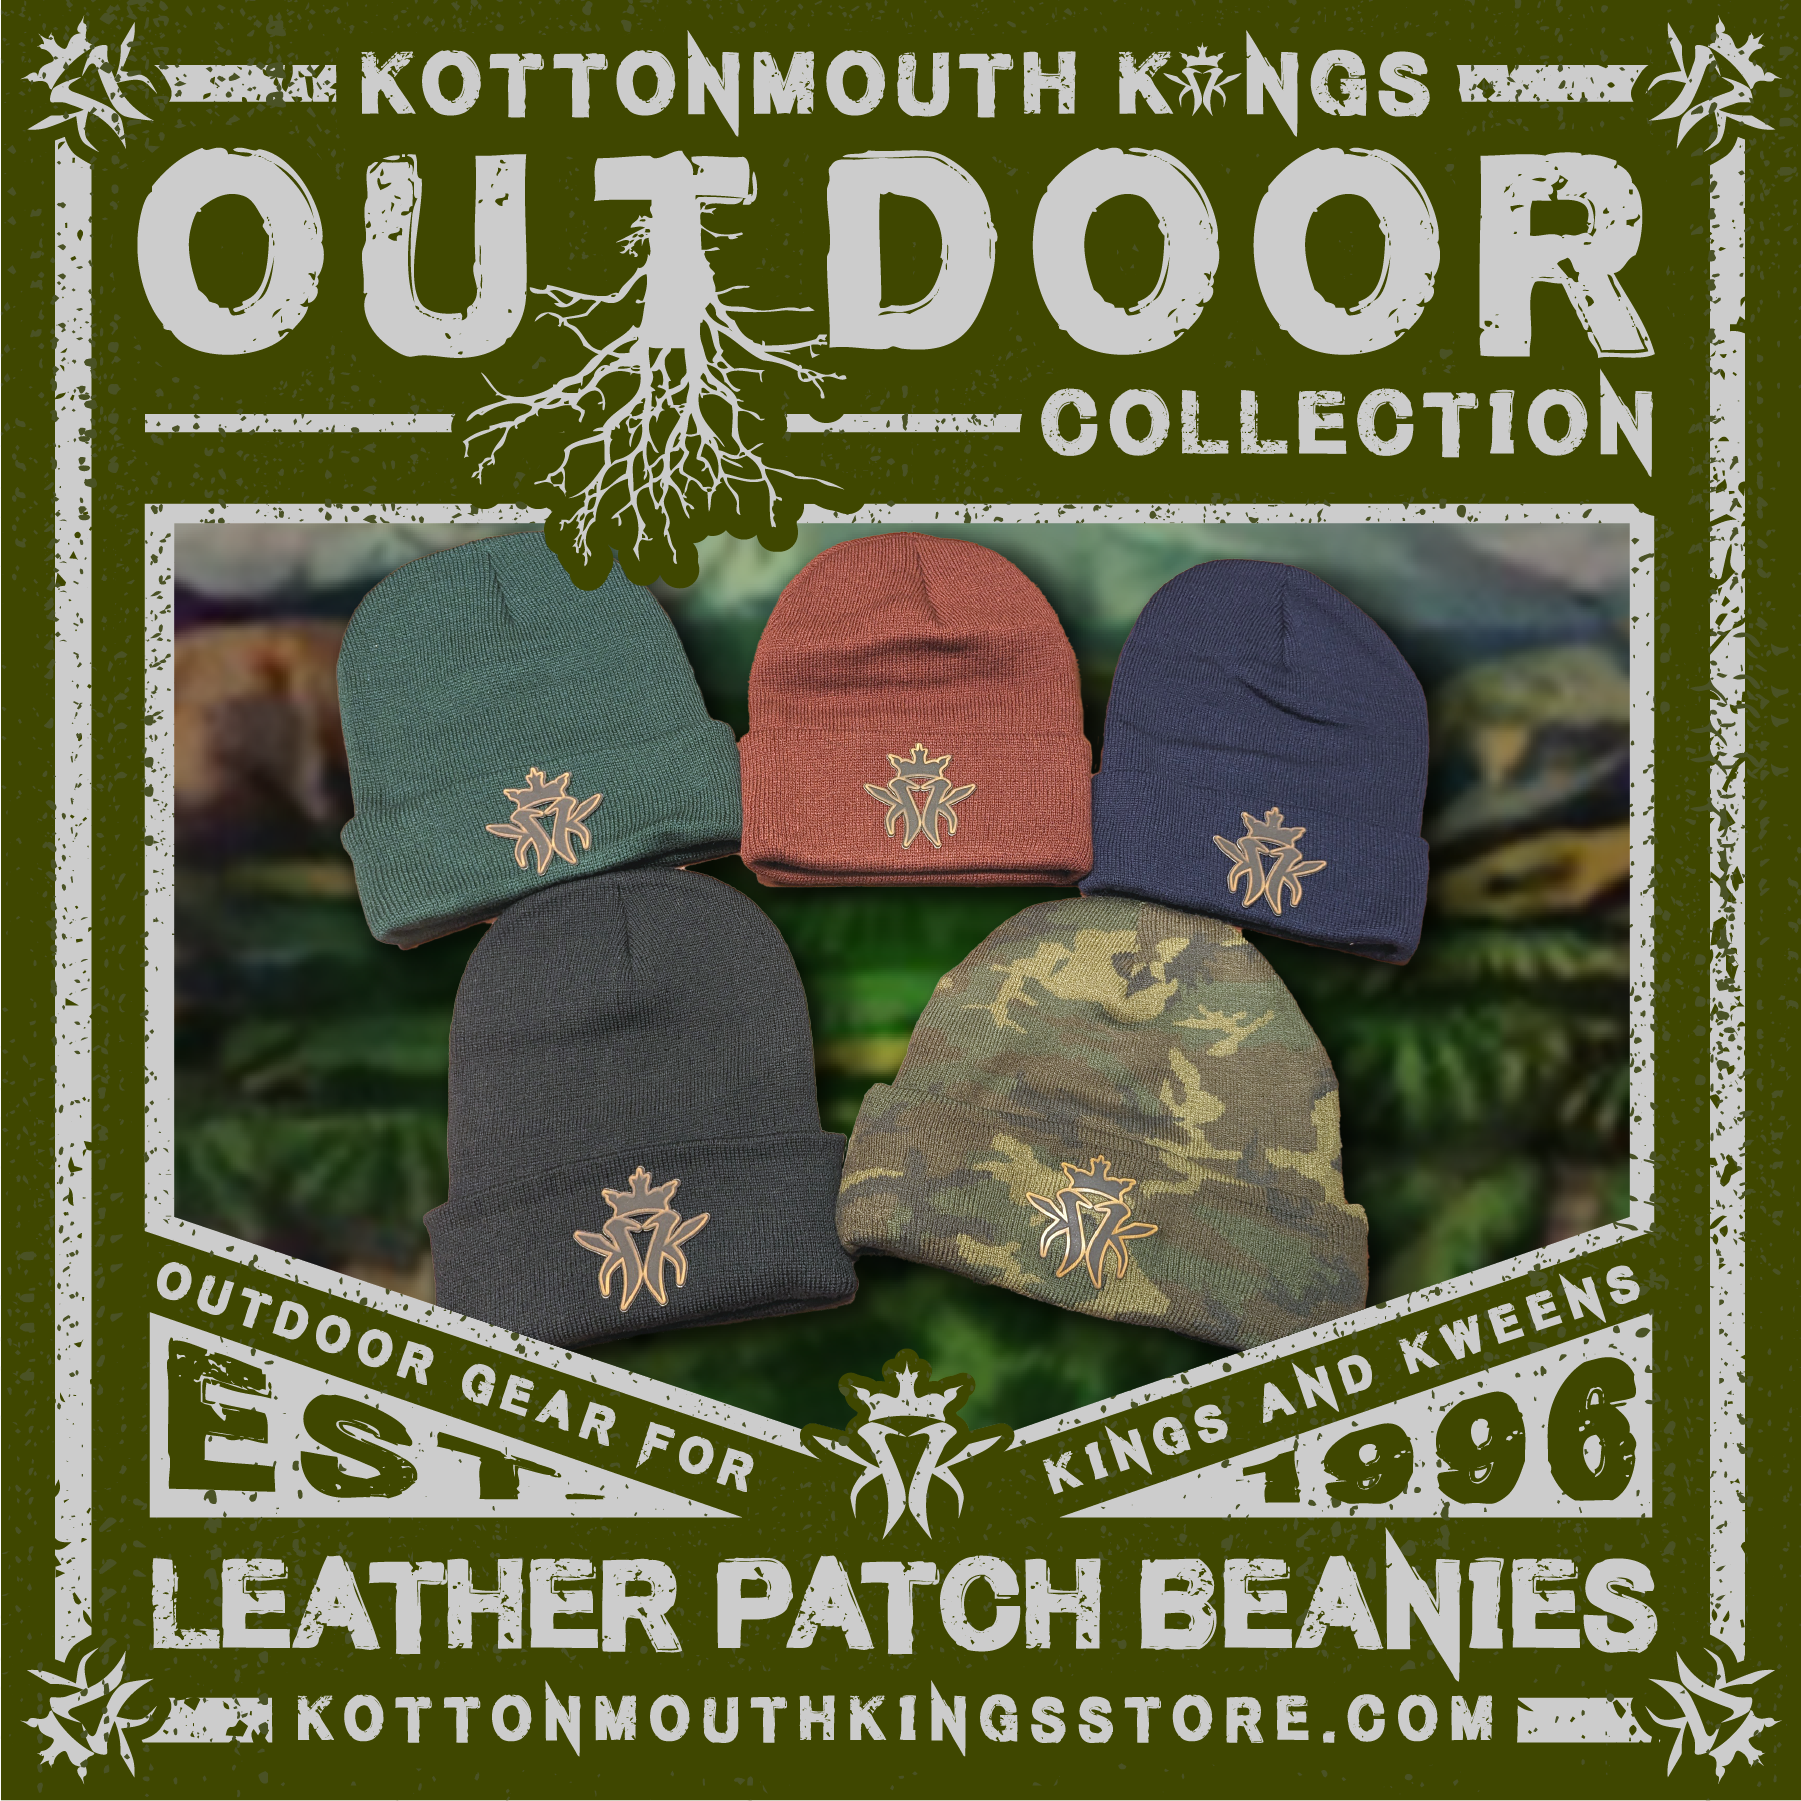 Kottonmouth Kings Leather Patch Beanie